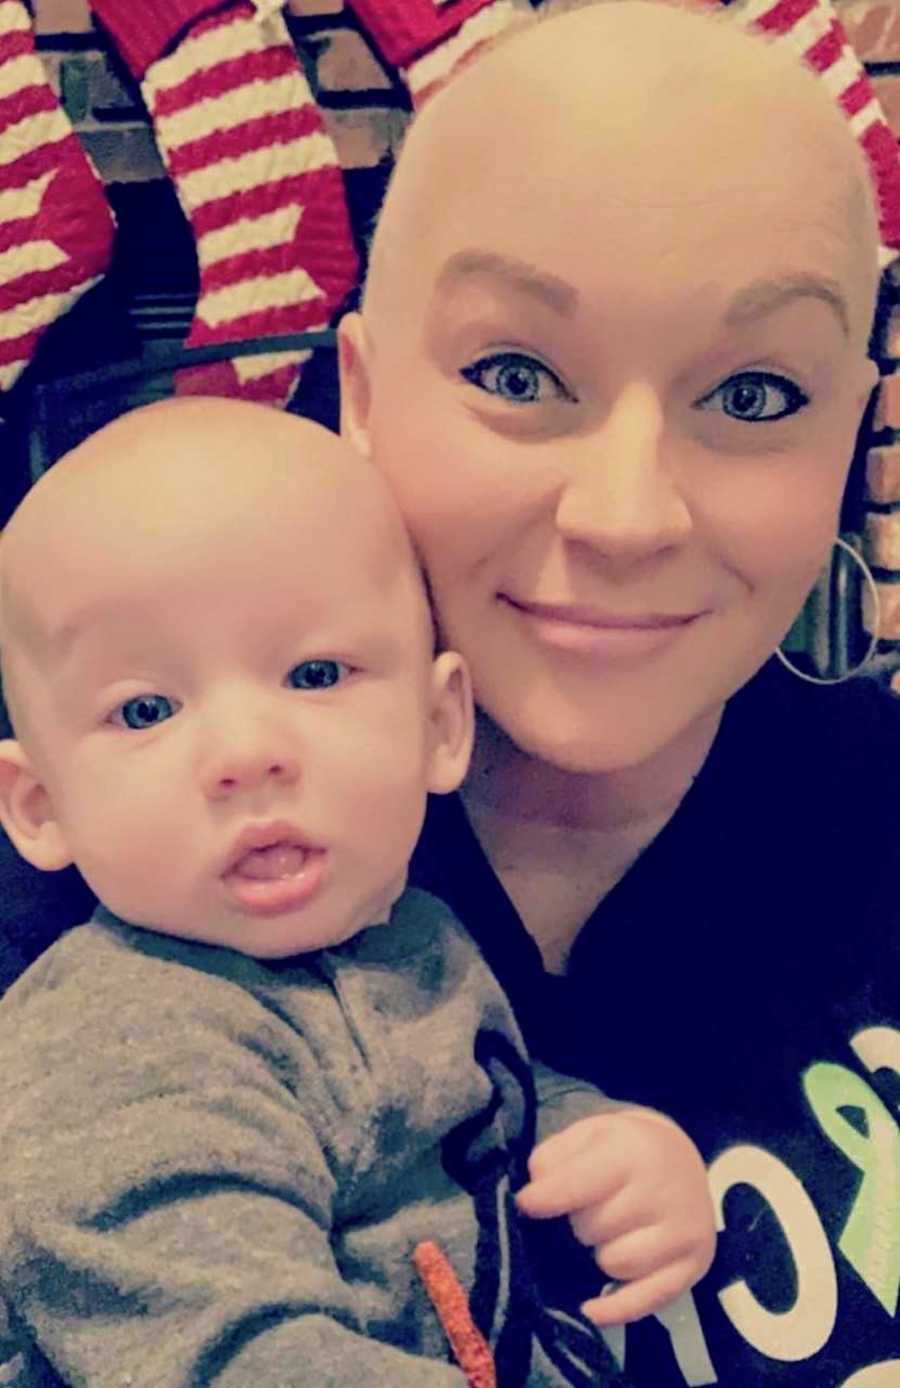 Mother with Hodgkin's lymphoma and shaved head smiles in selfie with her baby boy